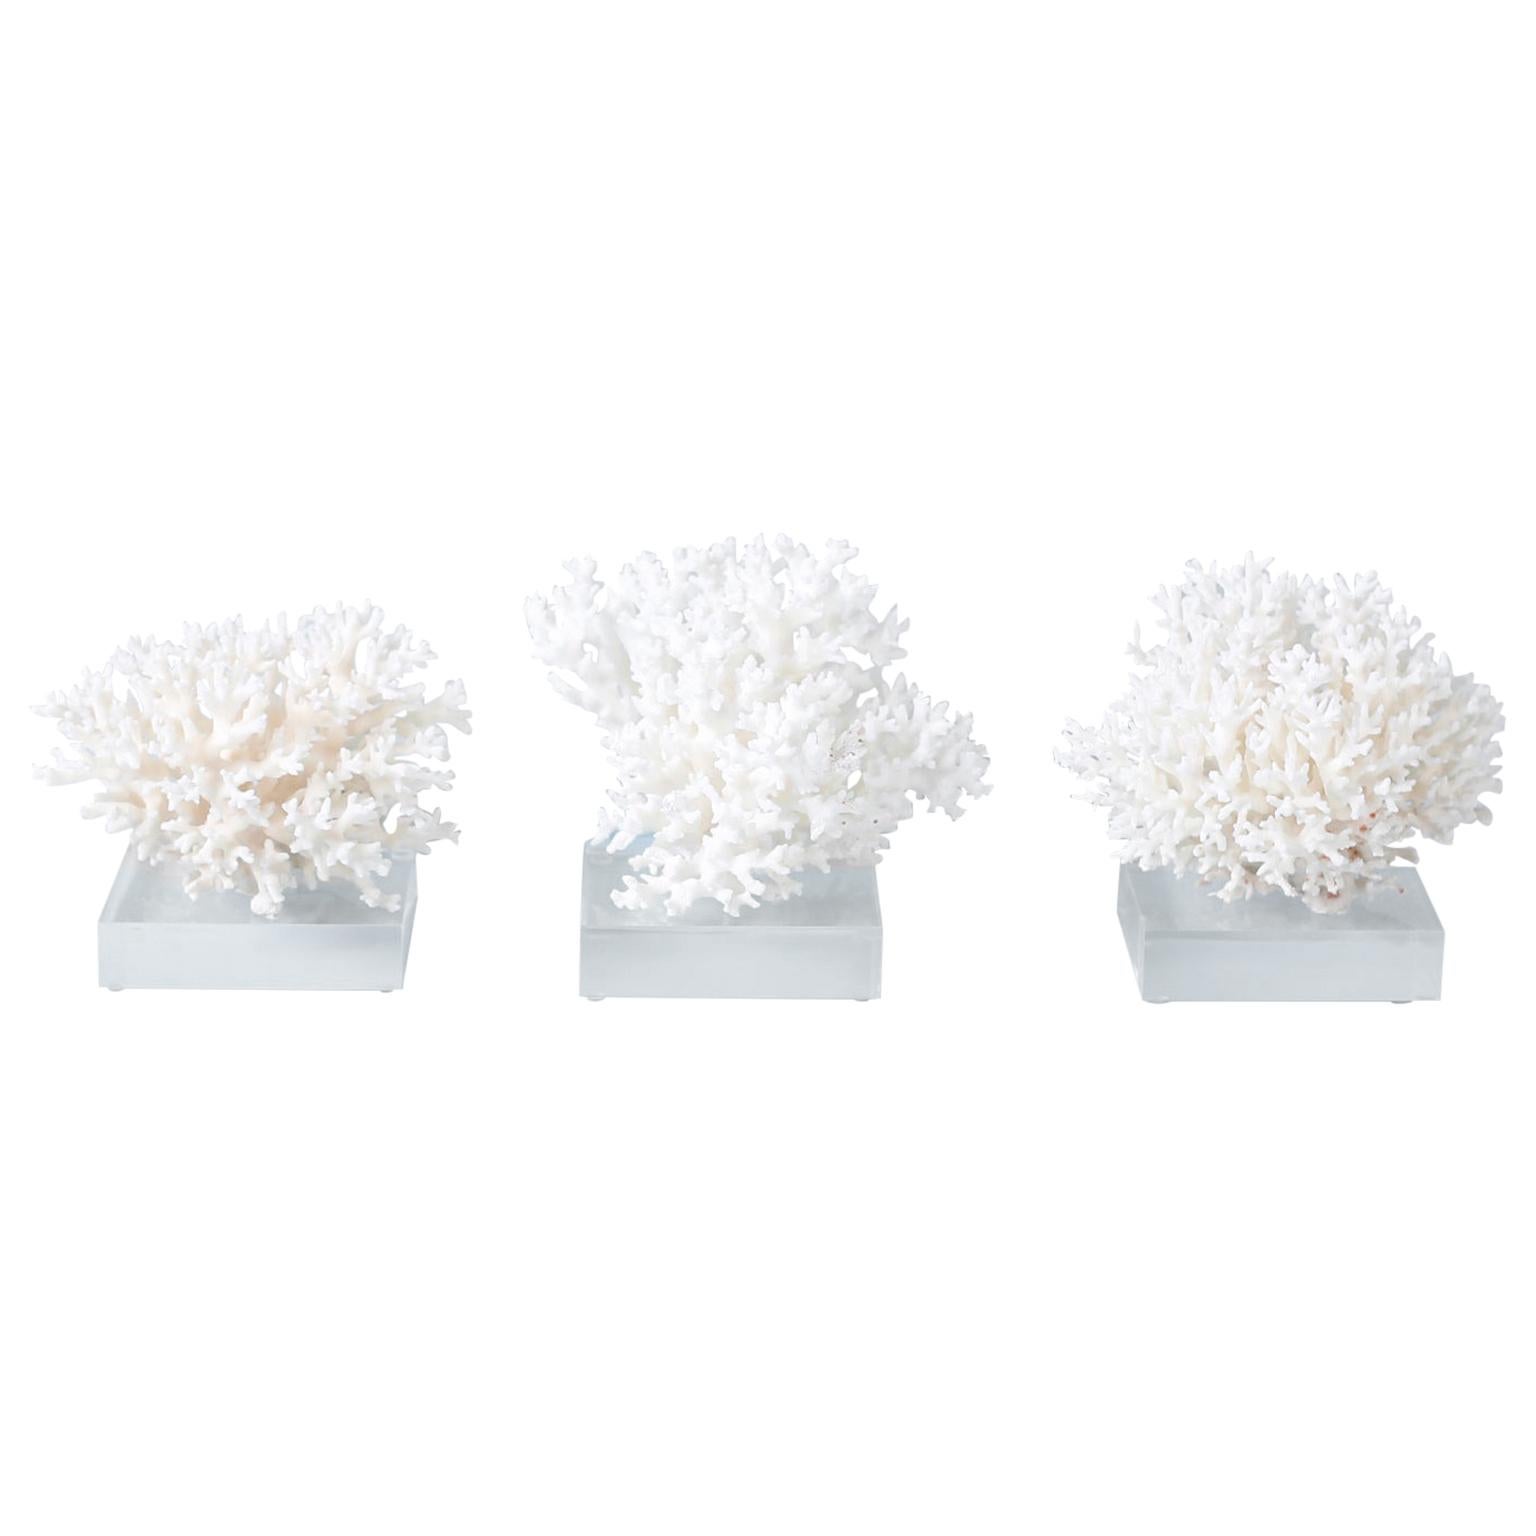 Three White Coral Specimens on Lucite, Priced Individually